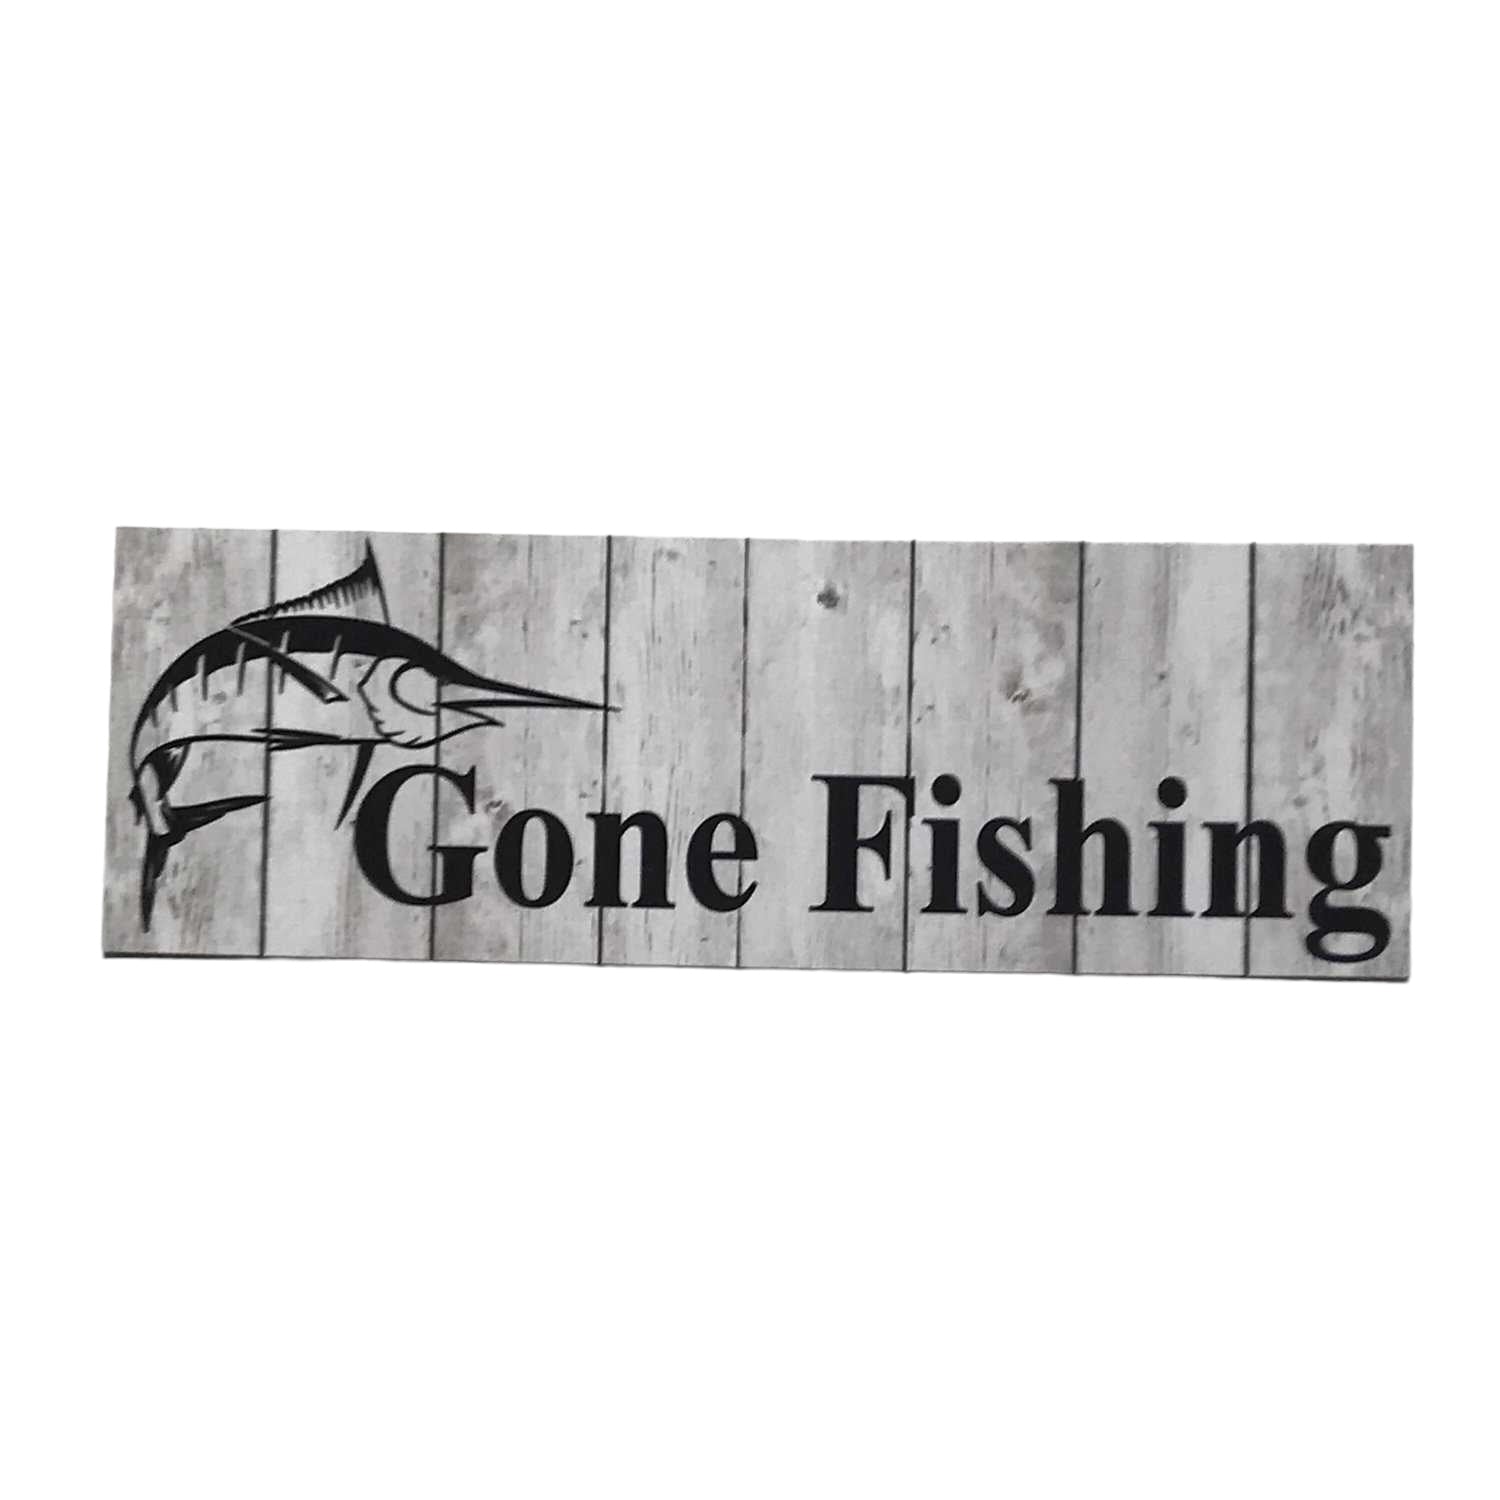 Gone Fishing with Marlin Fish Grey Sign - The Renmy Store Homewares & Gifts 